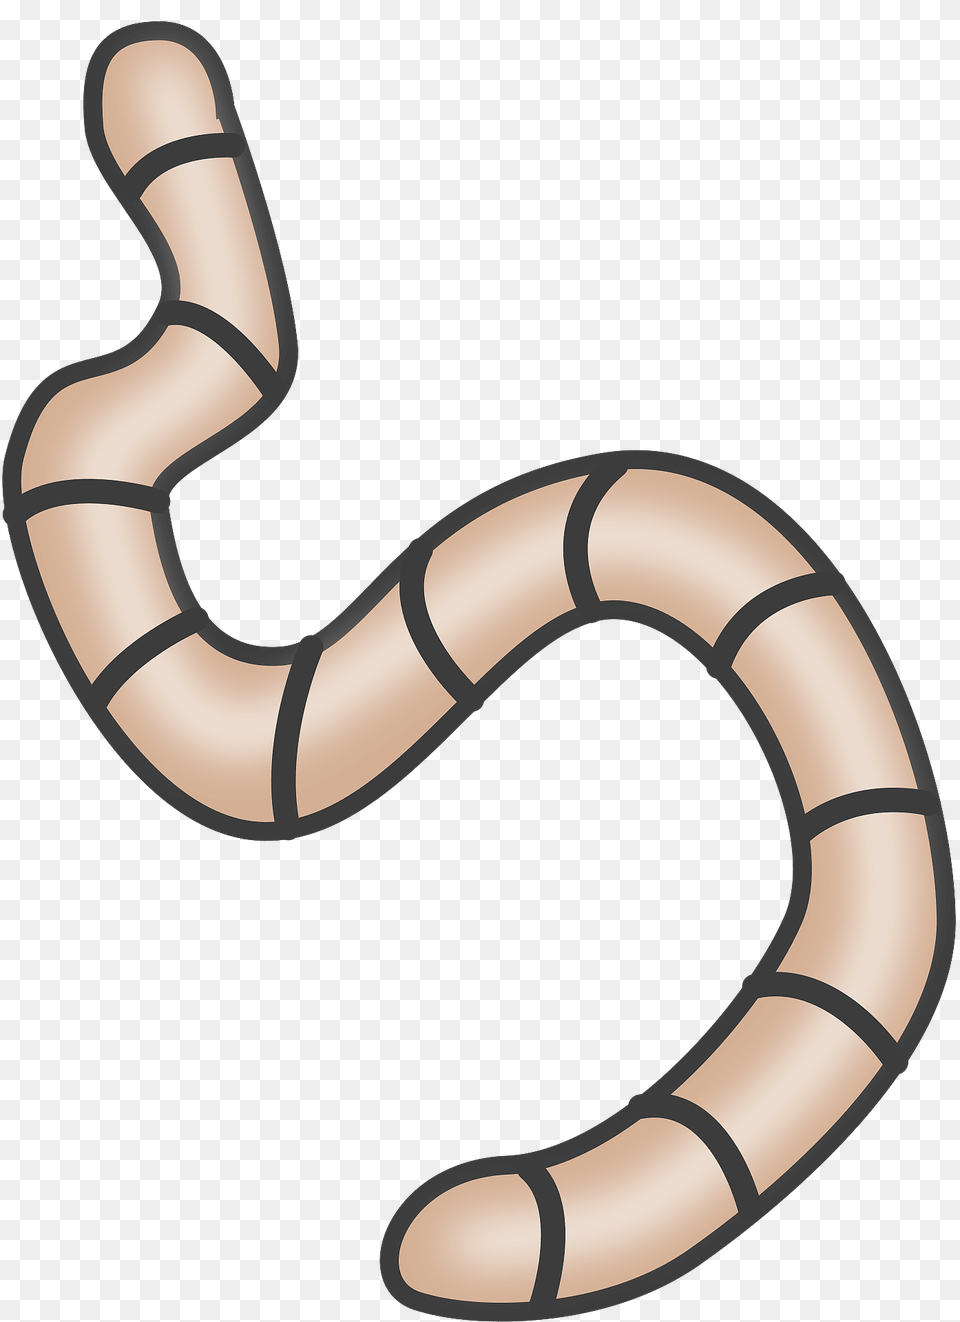 Earthworms Clipart, Smoke Pipe, Animal Png